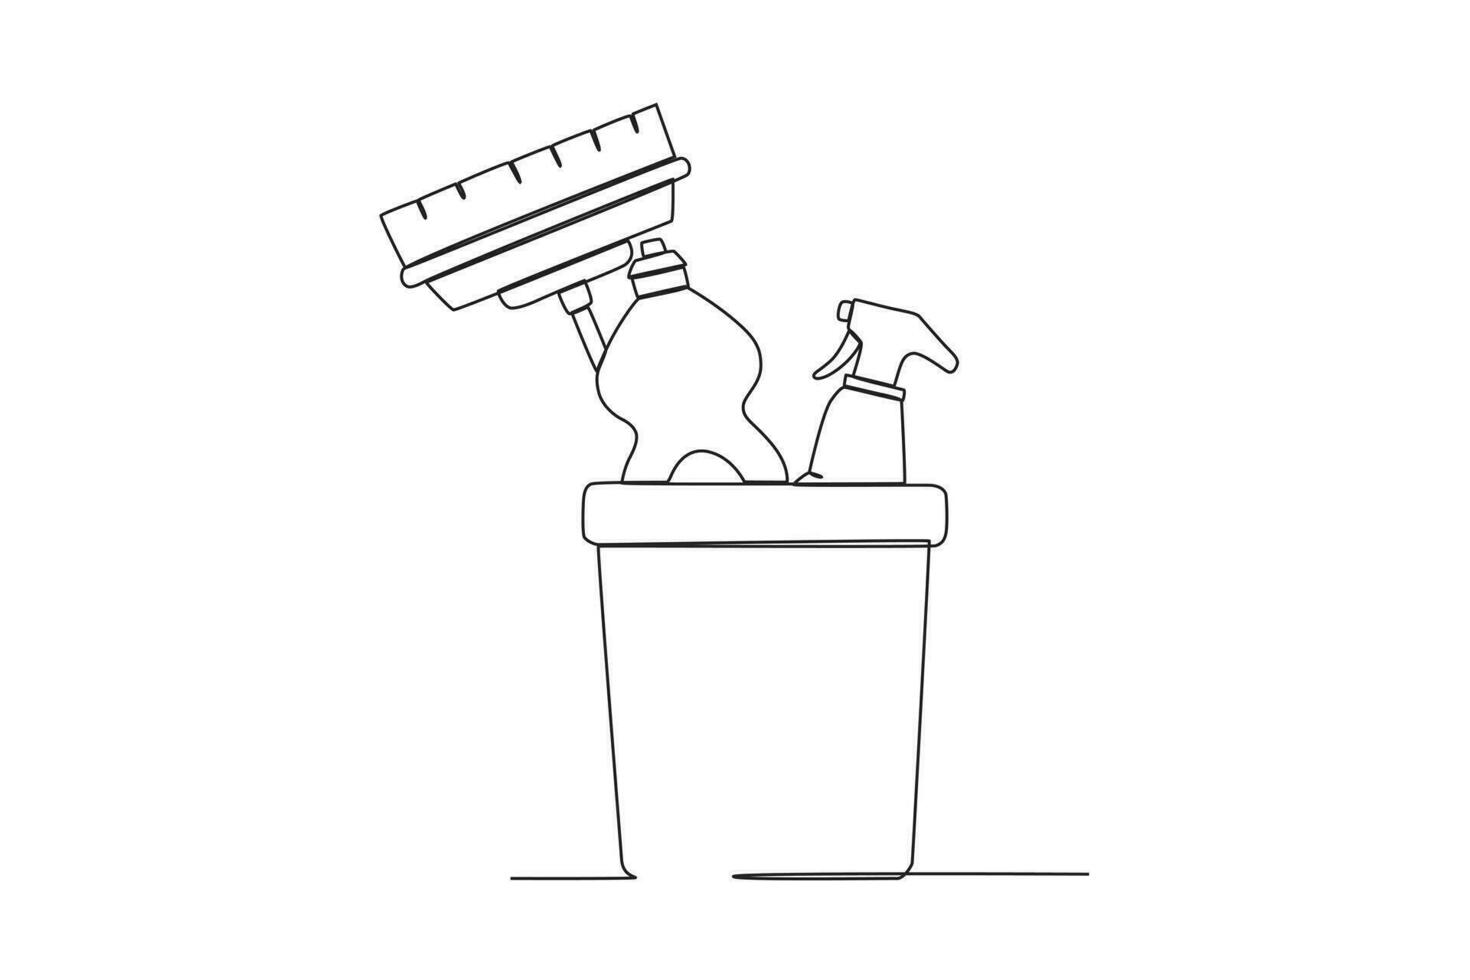 A detergent and a broom in a bucket vector